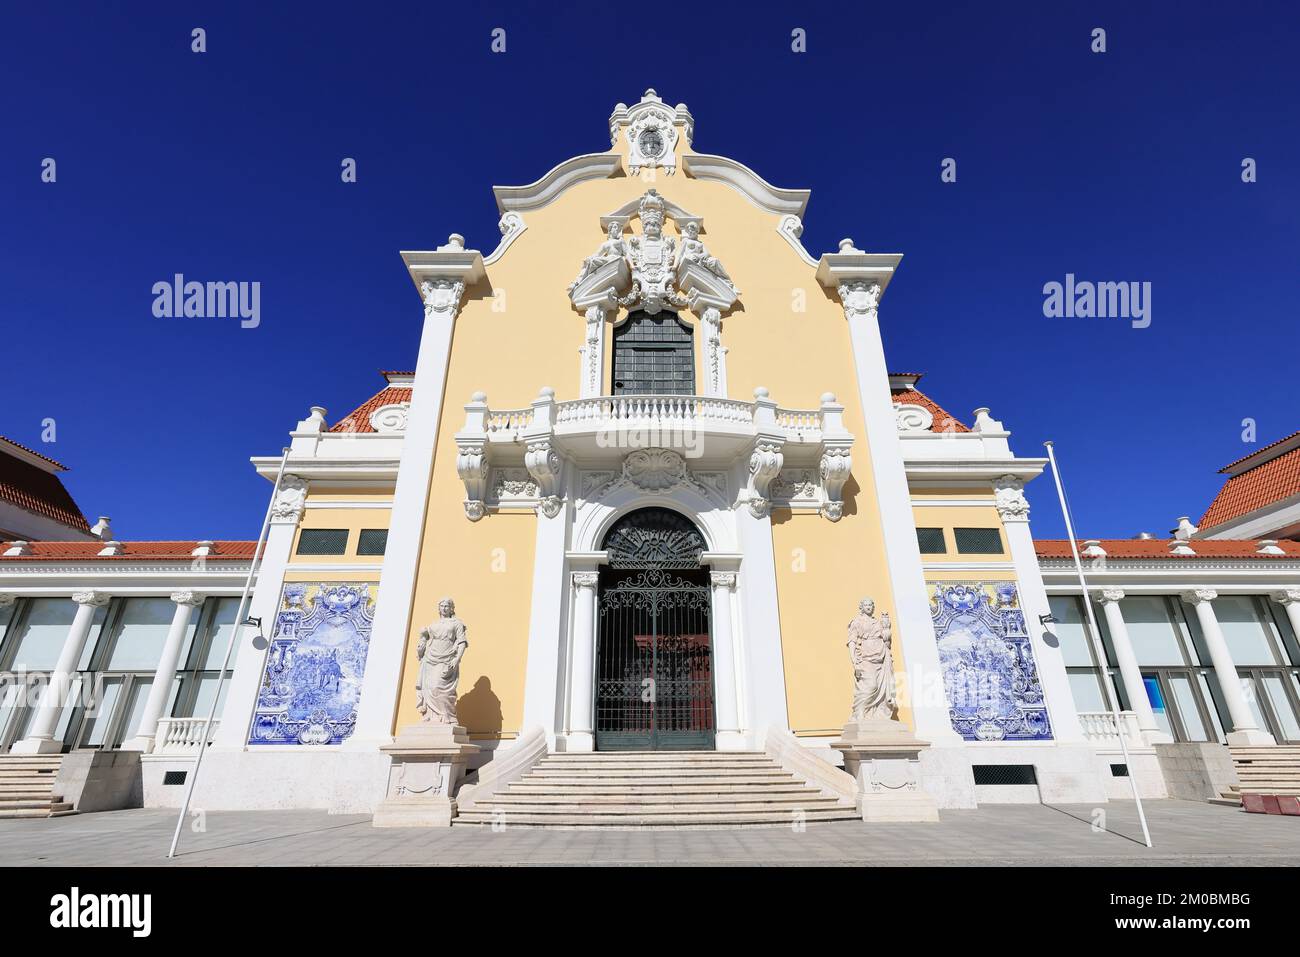 Pavilhão Carlos Lopes. Carlos Lopes Pavilion in the Eduardo VII Park in Lisbon, Portugal. Venue for events with azulejos tile work on its walls. Stock Photo